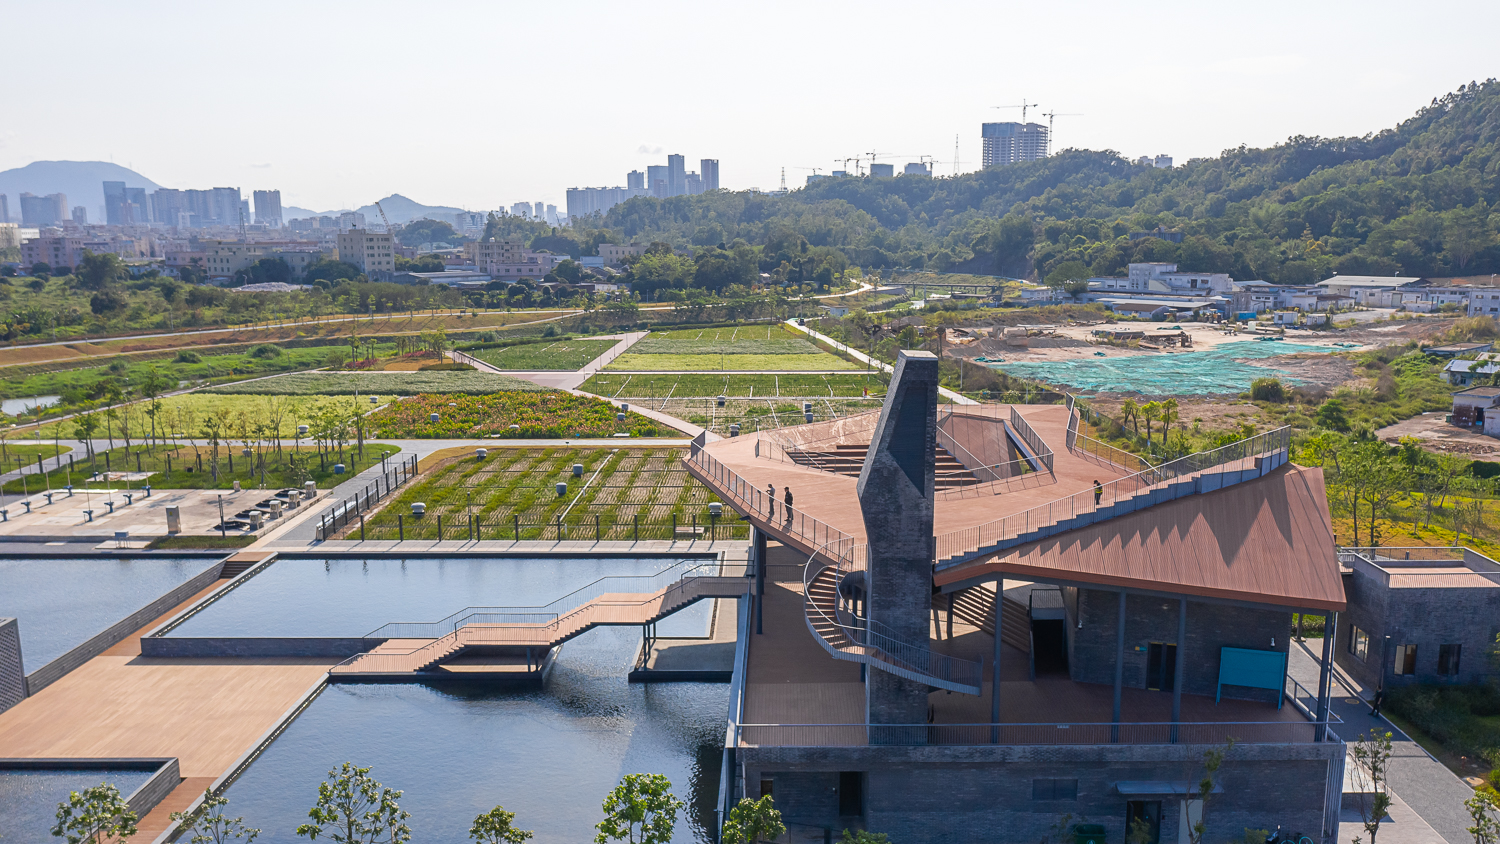 Pingshan Terrace: The Design of Pingshan River Water Purification Station 